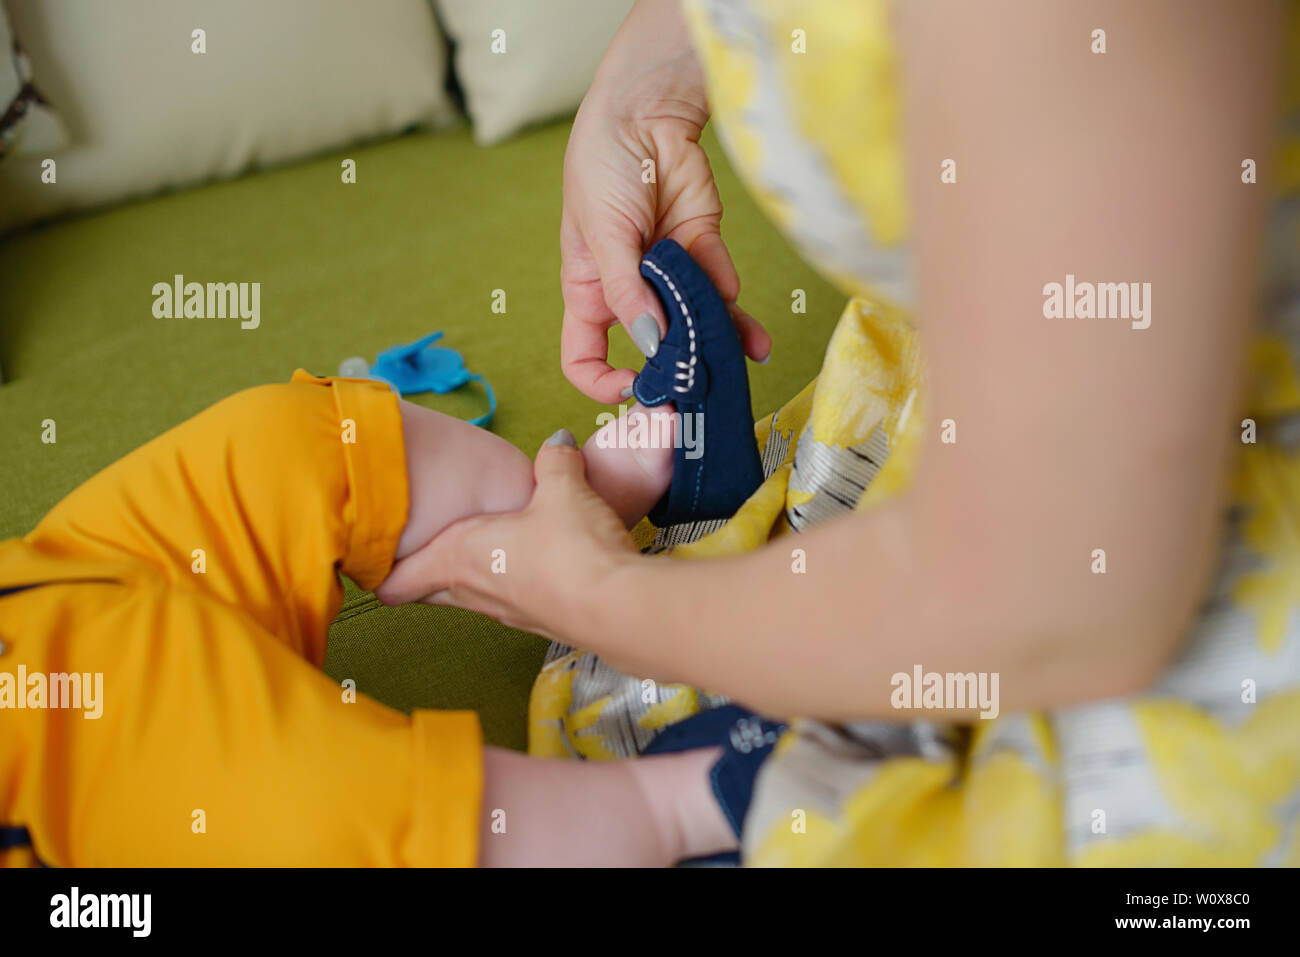 Caucasian young mother wearing a vintage yellow dress and helping little baby boy getting ready, with focus on the hands fitting cute blue shoes Stock Photo